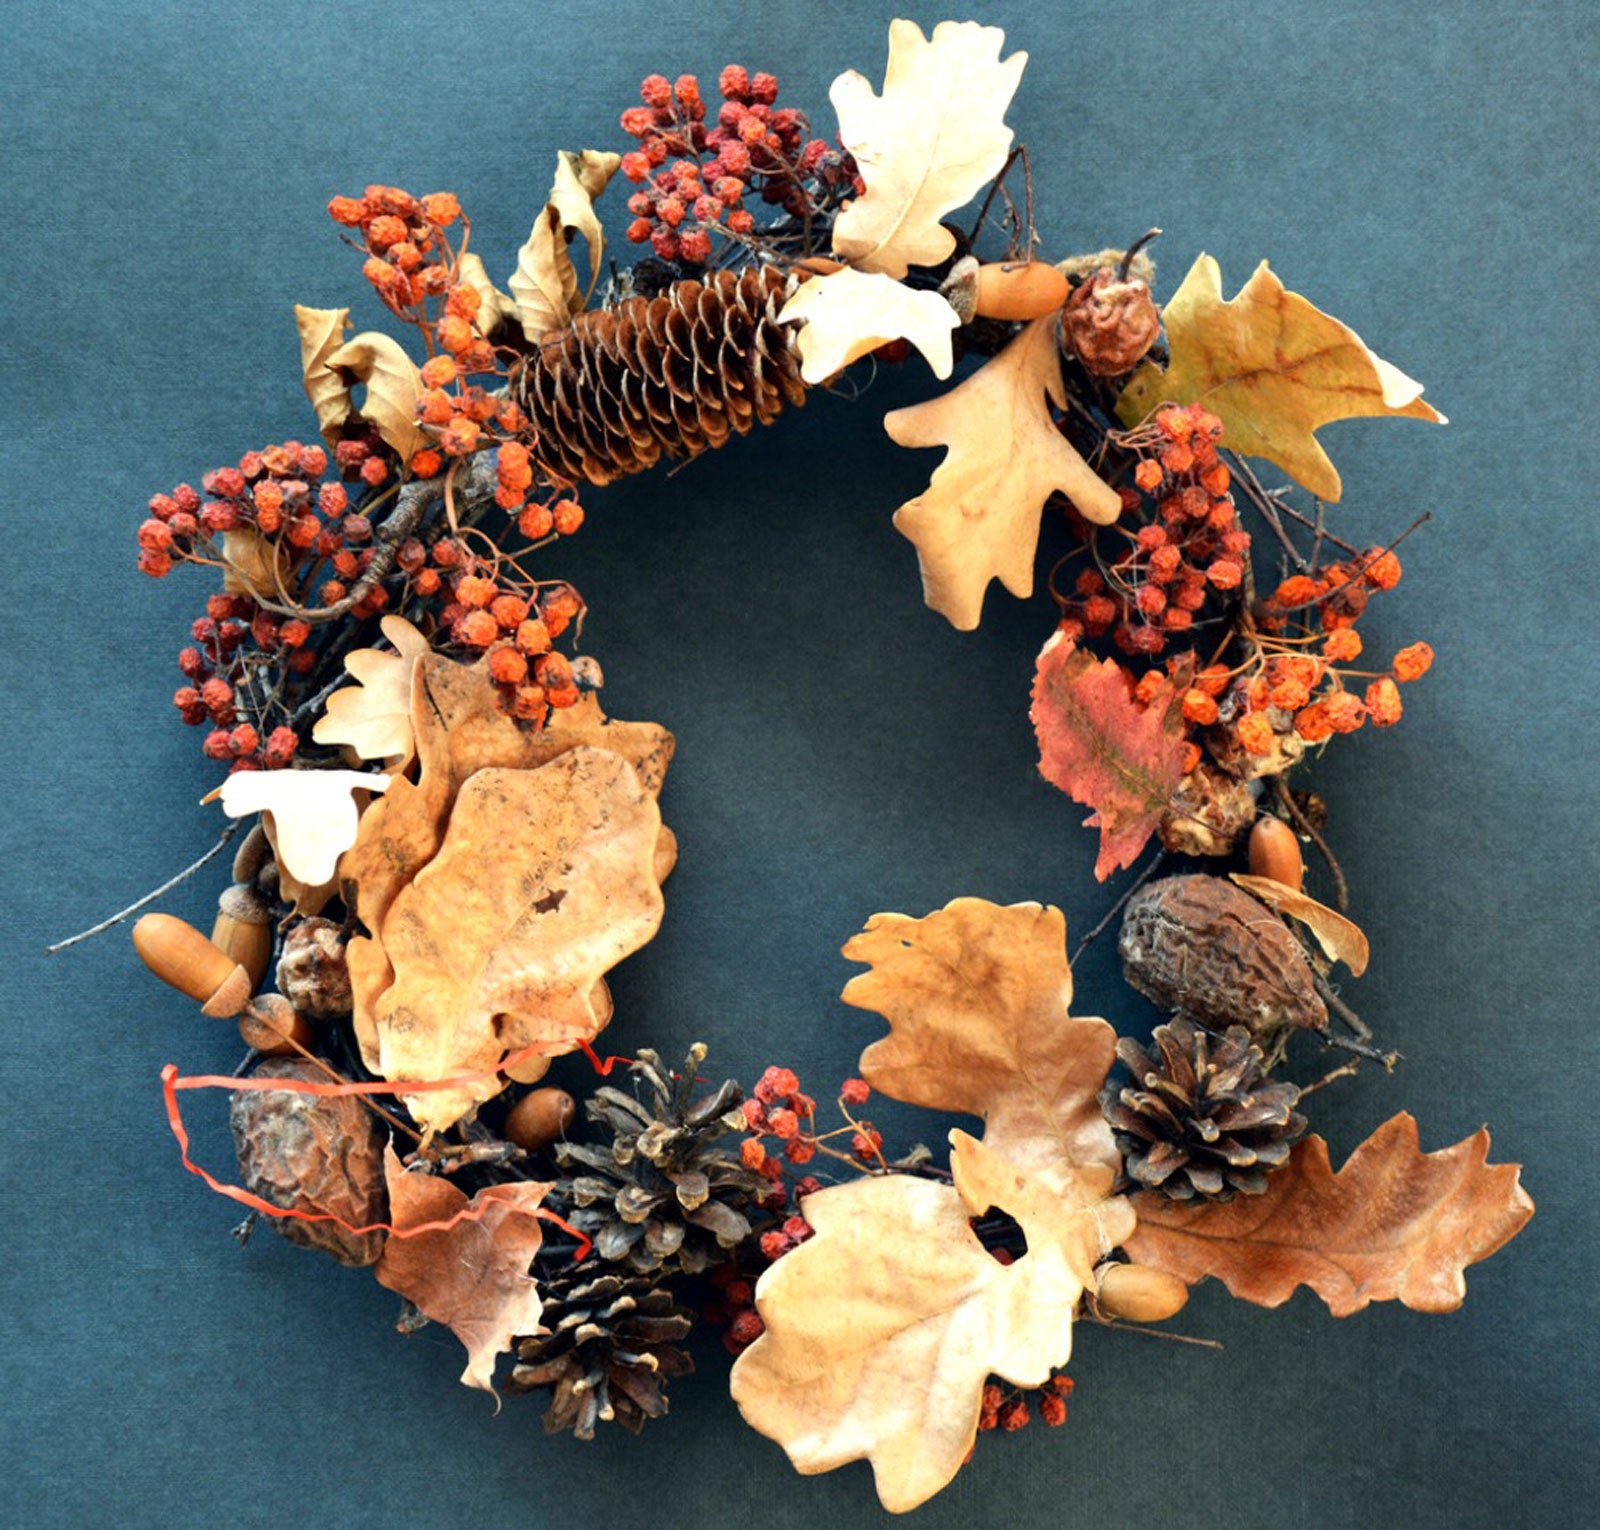 Fall Nature Crafts: Crafting Things From Nature And Your Garden